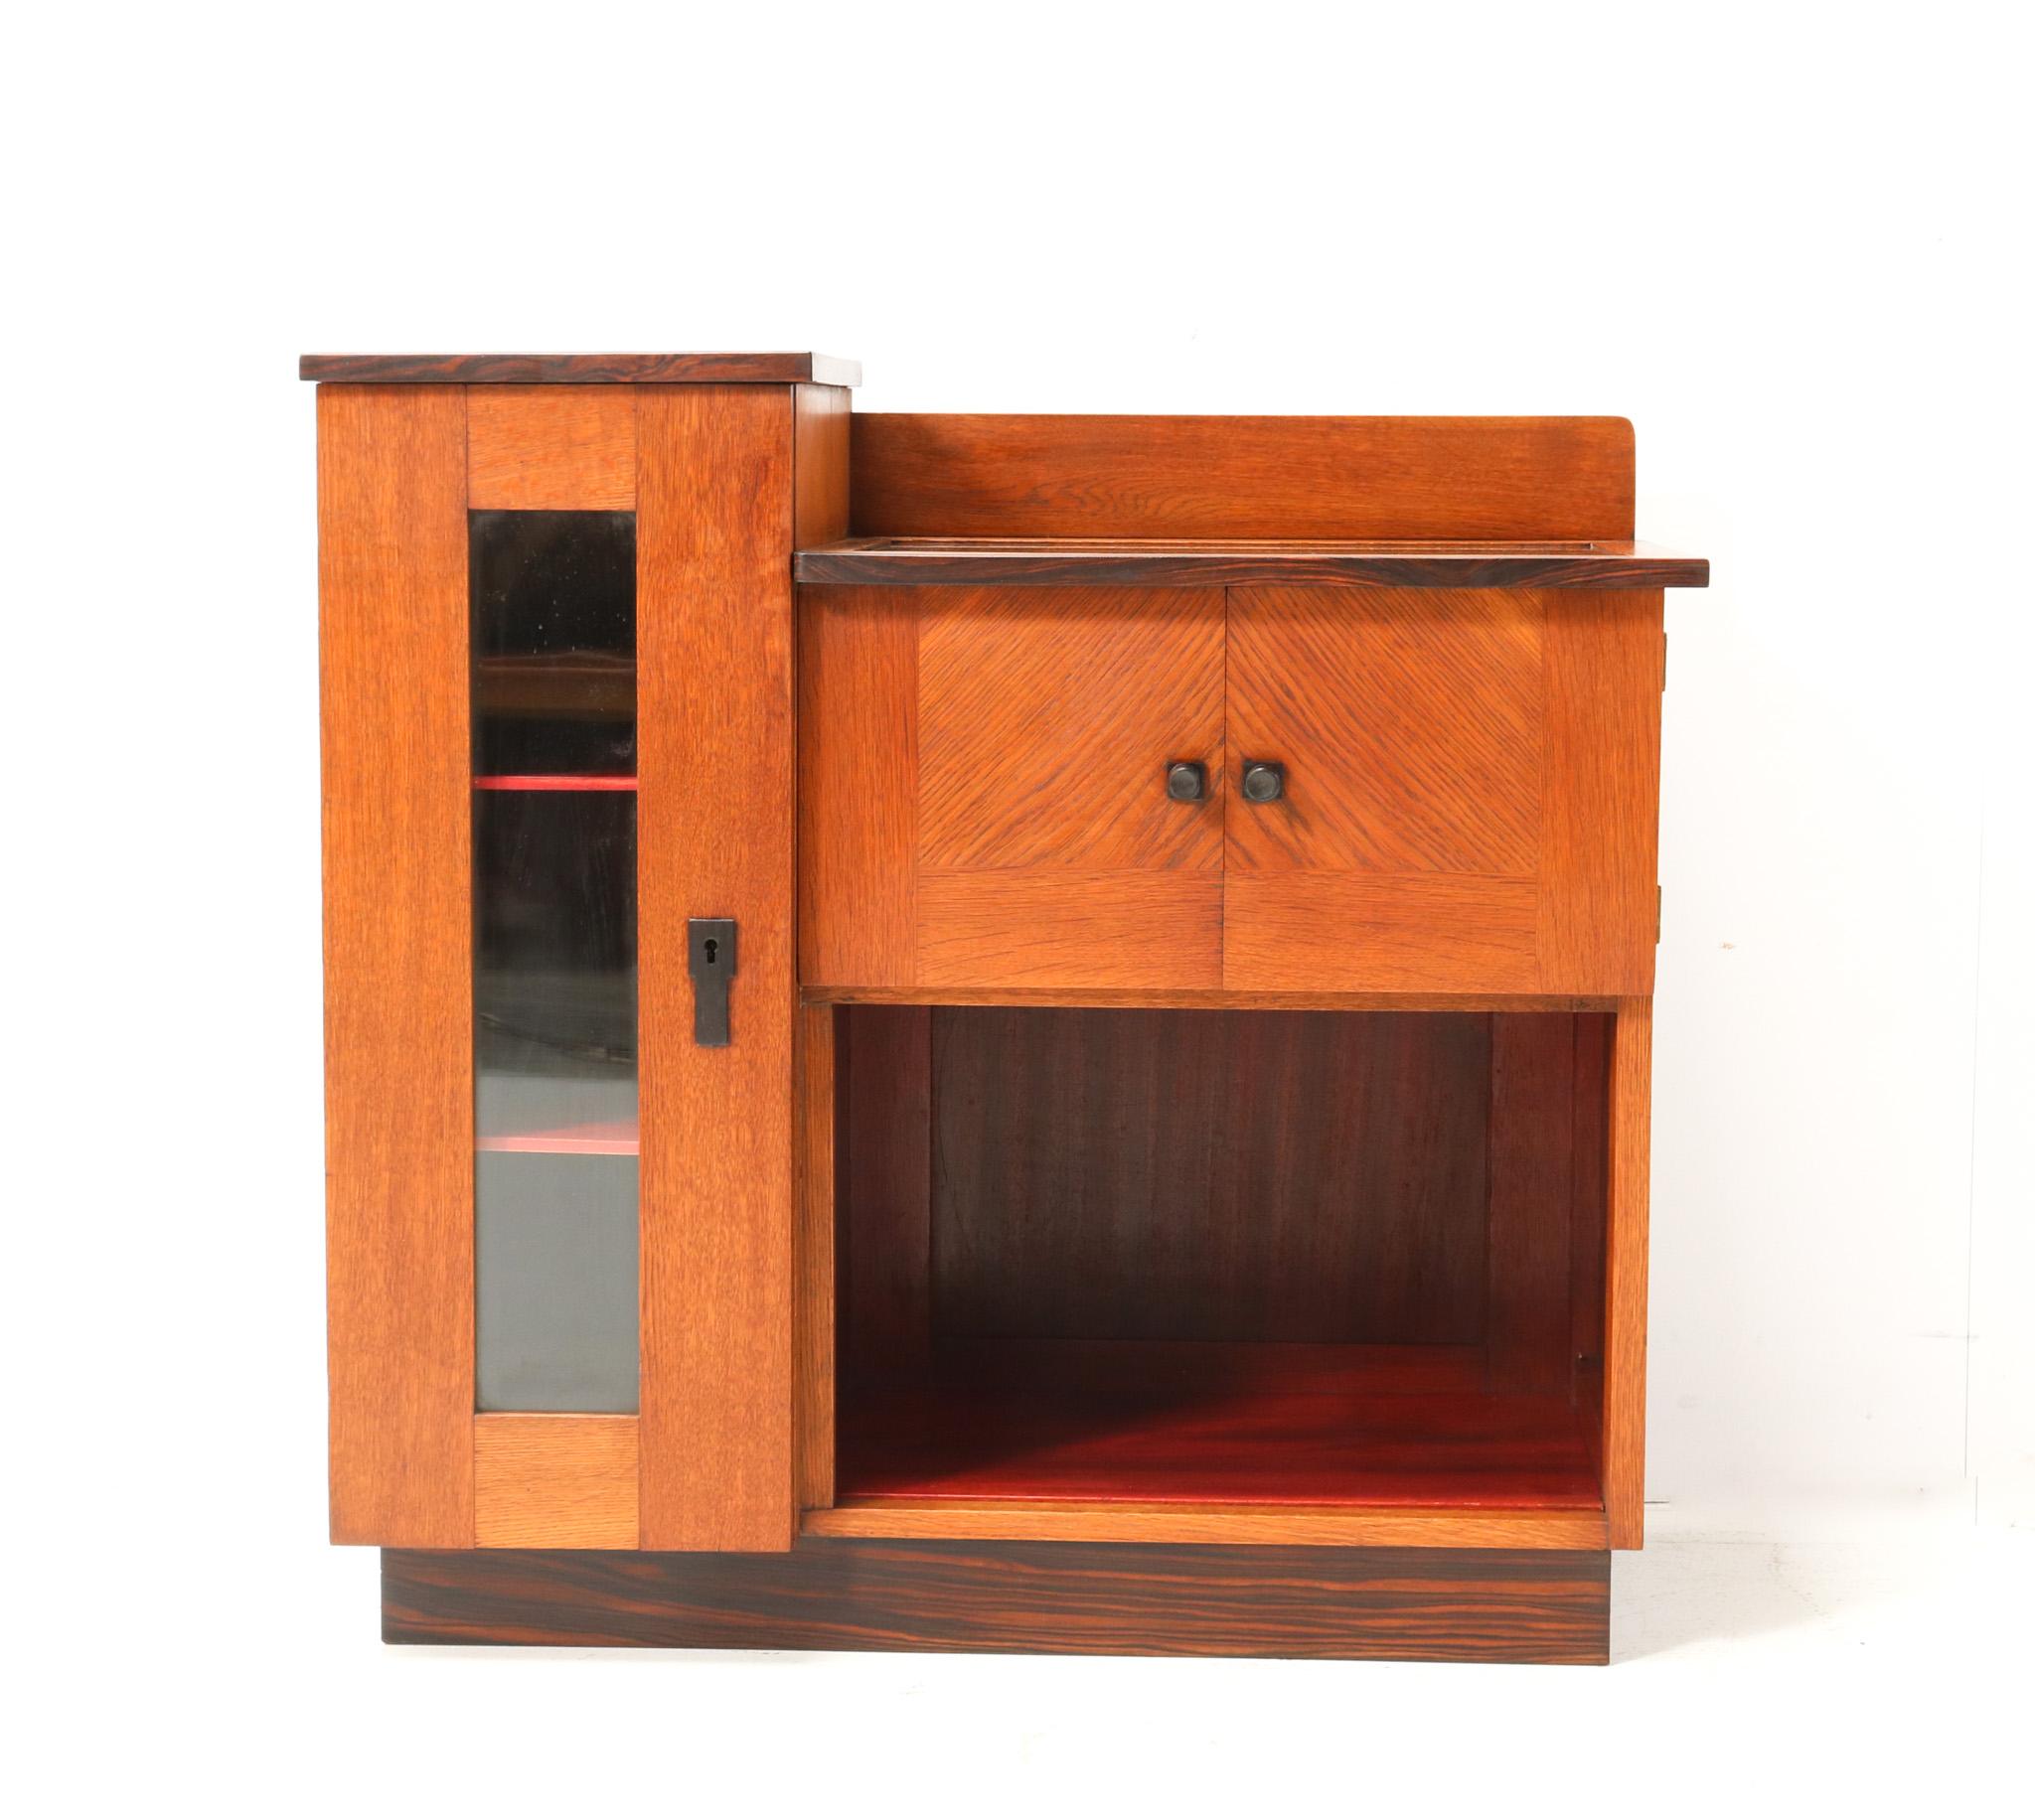 Stunning and rare Art Deco Modernist tea cabinet.
Design by P.E.L. Izeren for De Genneper Molen.
Striking Dutch design from the 1920s.
Solid oak with original oak veneer base with two original solid macassar ebony knobs on the two small doors.
Two